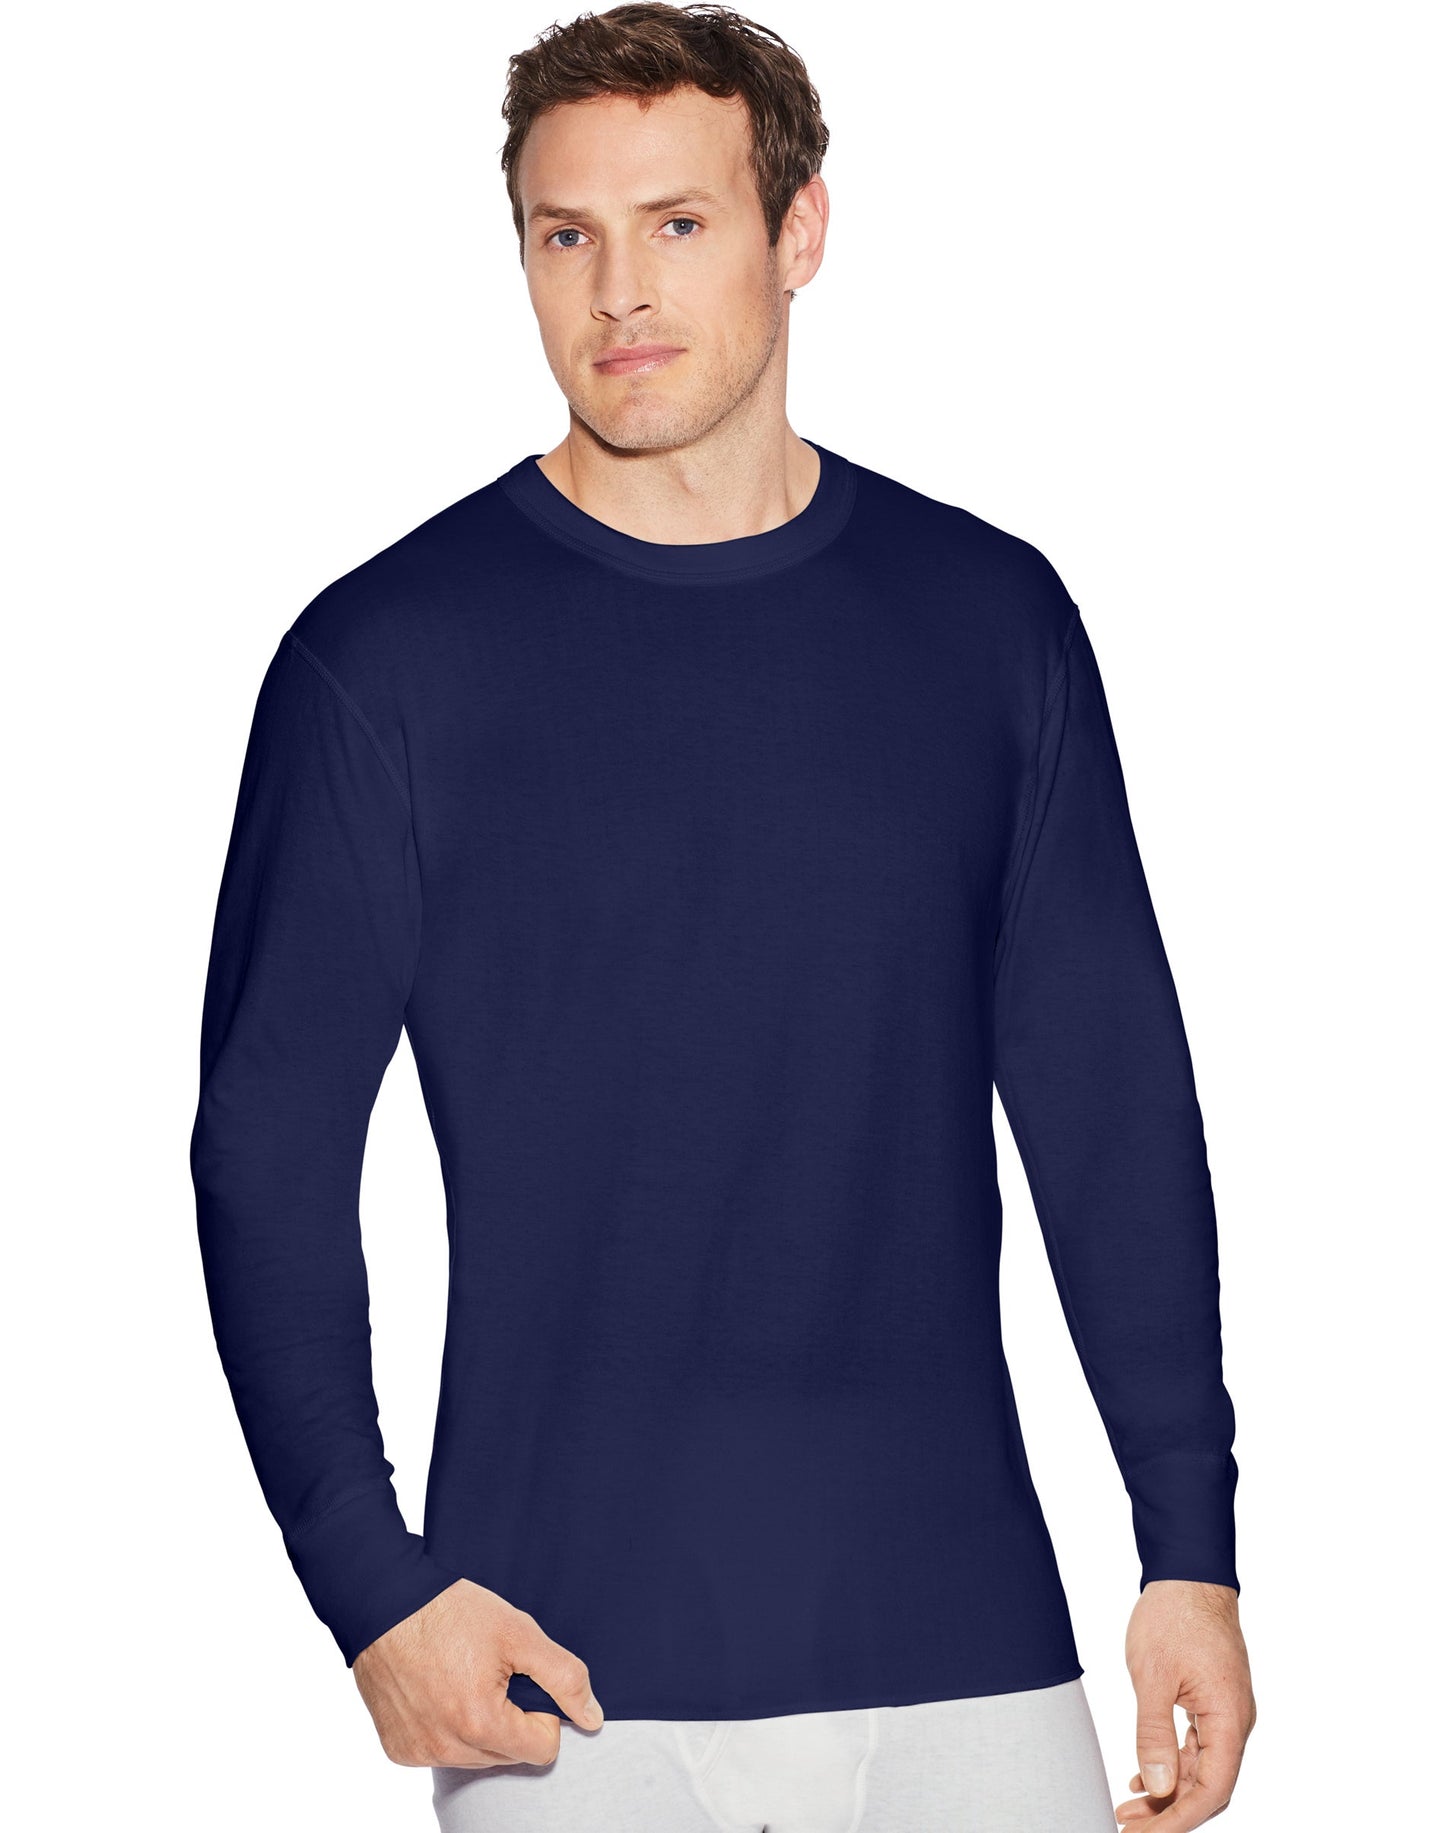 Mid Weight Long Sleeve Base Layer Thermal Shirt